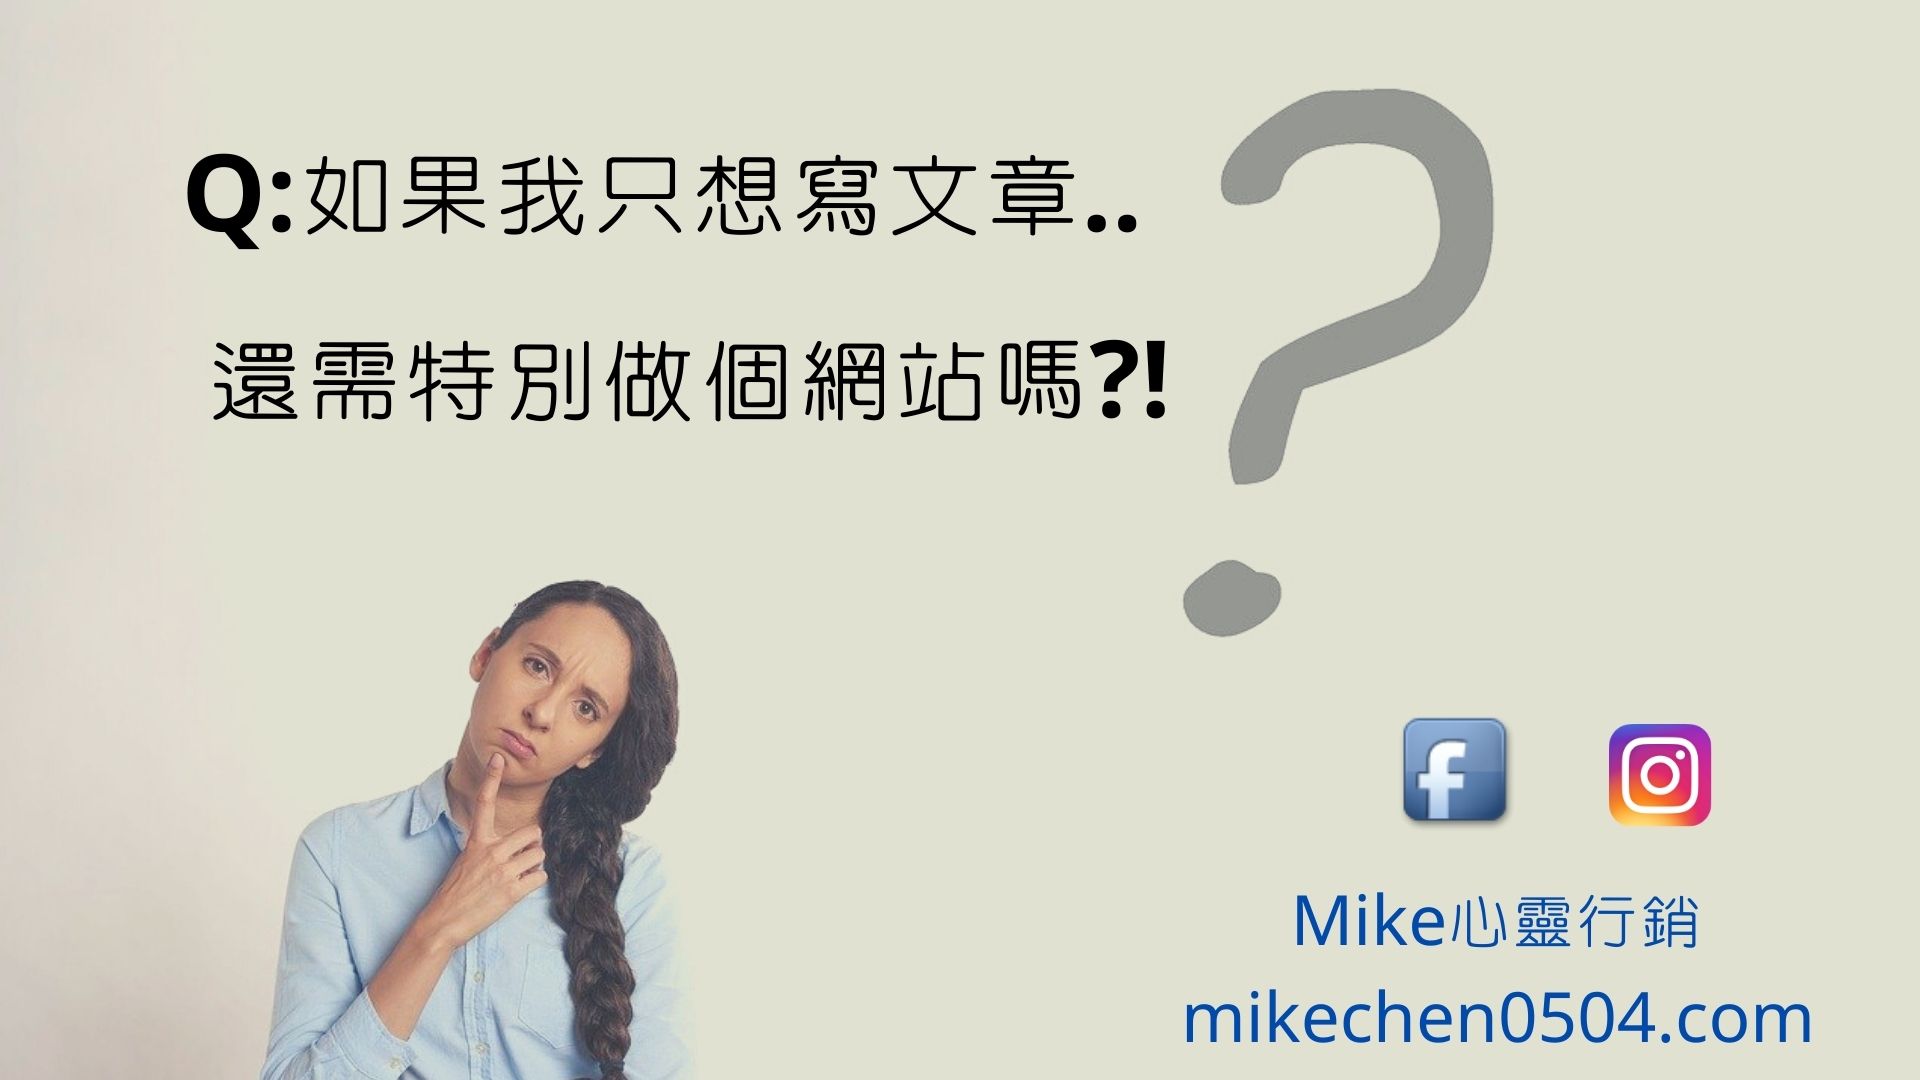 You are currently viewing Q:我只想寫寫文章而已，有需要找Mike作網站嗎?